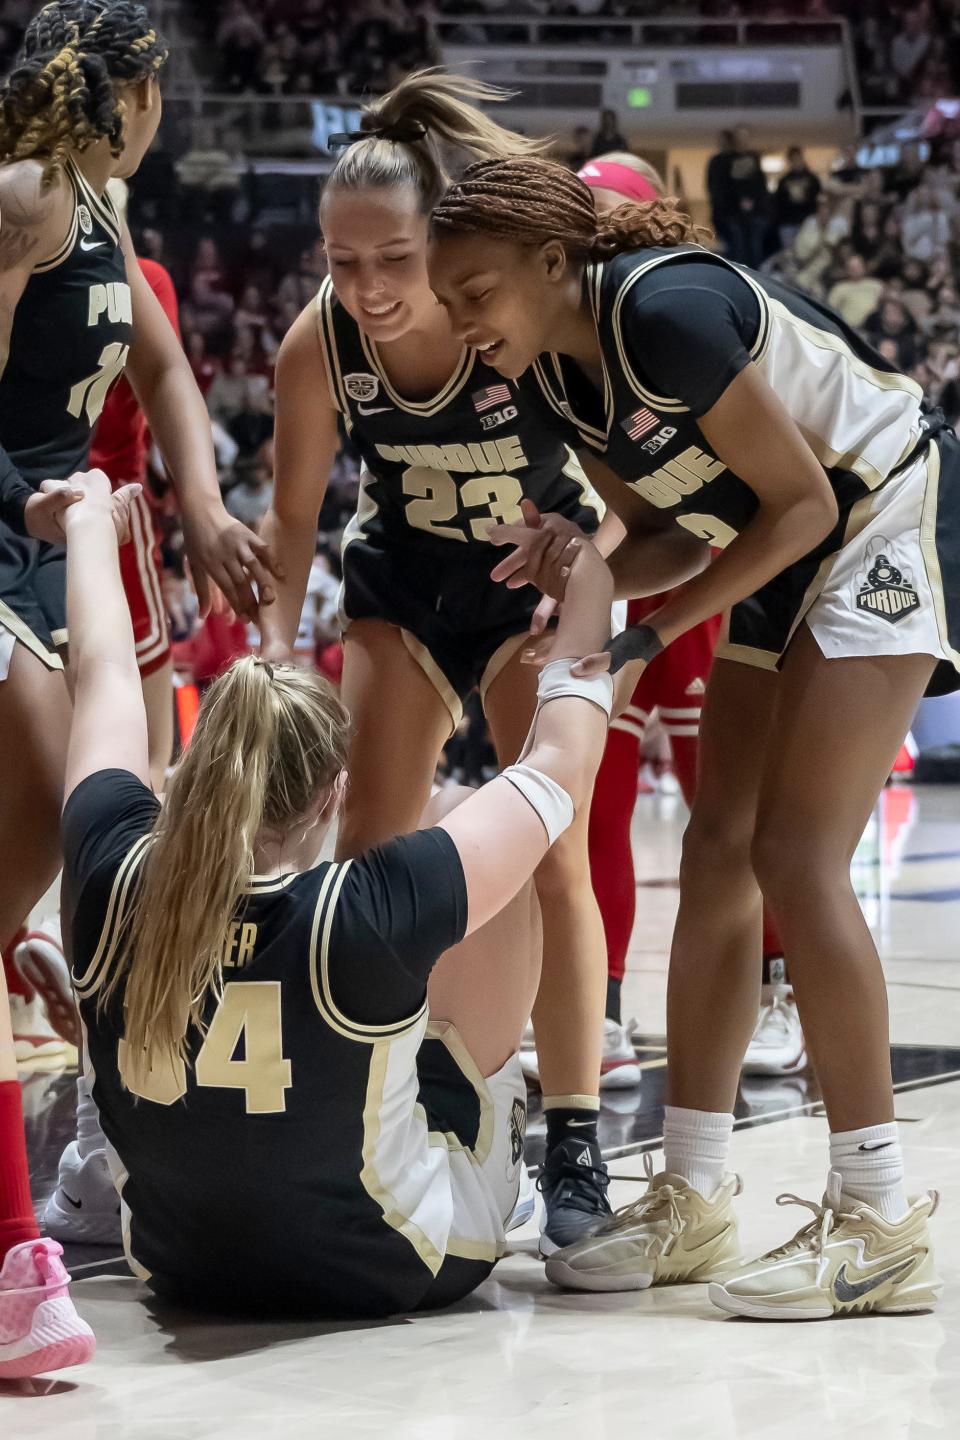 Teammates help Purdue Boilermakers forward Caitlyn Harper (34) up after a hard foul during the NCAA women’s basketball game against the Indiana Hoosiers, Sunday Jan. 21, 2024, at Mackey Arena in West Lafayette, Ind. Indiana won 74-68.